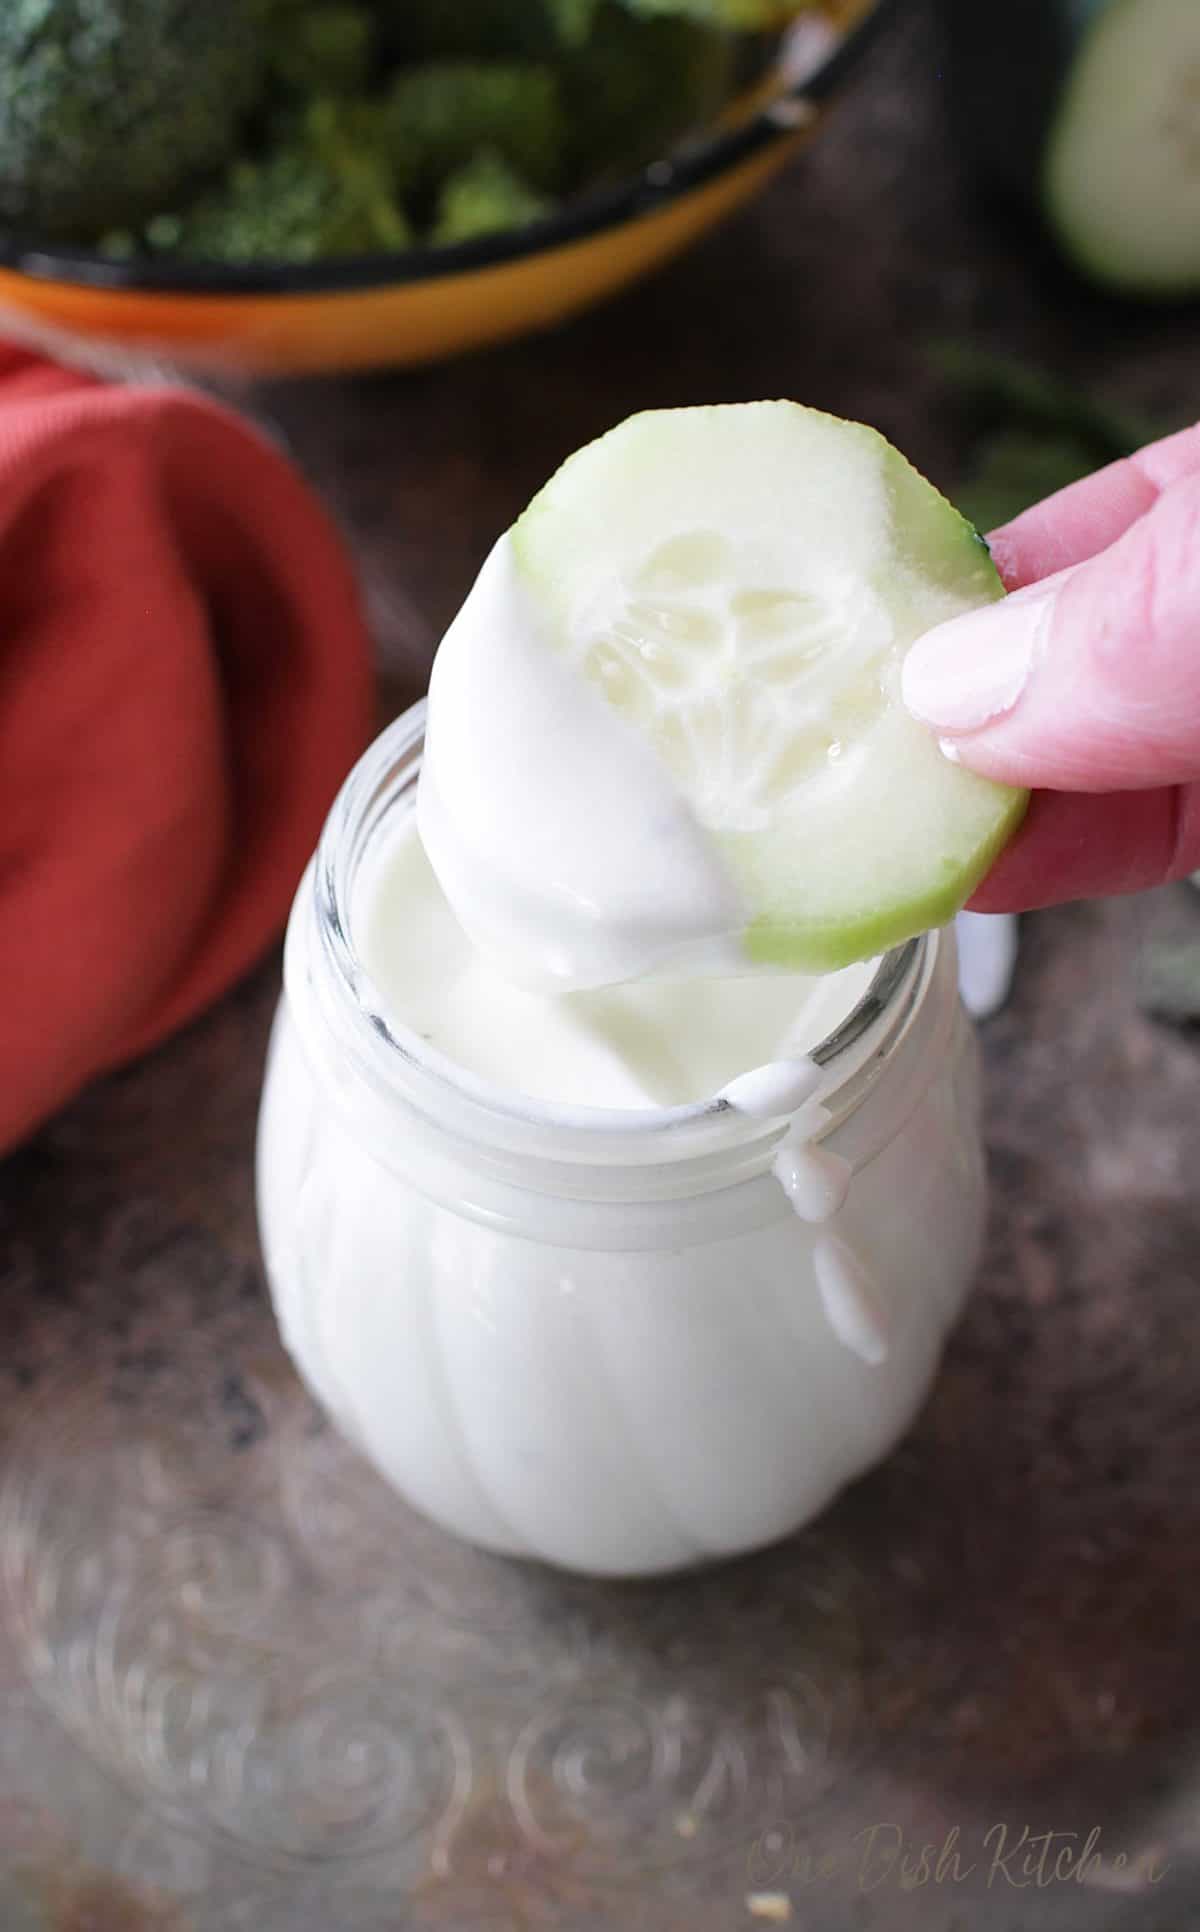 Dipping a cucumber slice in a jar of goat cheese salad dressing.